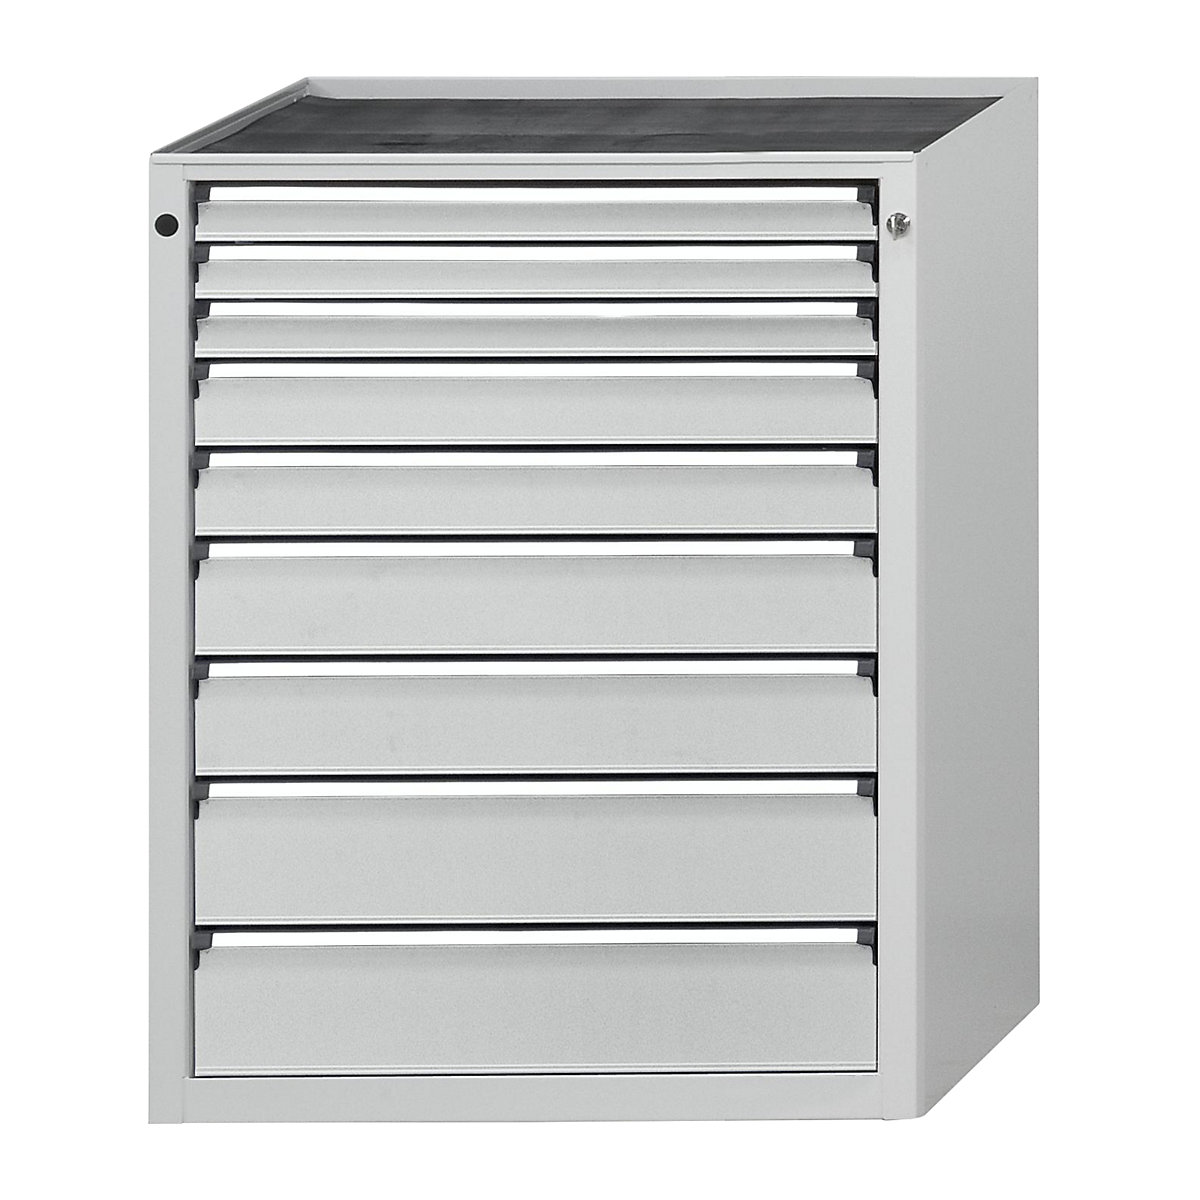 Drawer cupboard – ANKE, WxD 760 x 675 mm, 9 drawers, height 980 mm, front in light grey-6